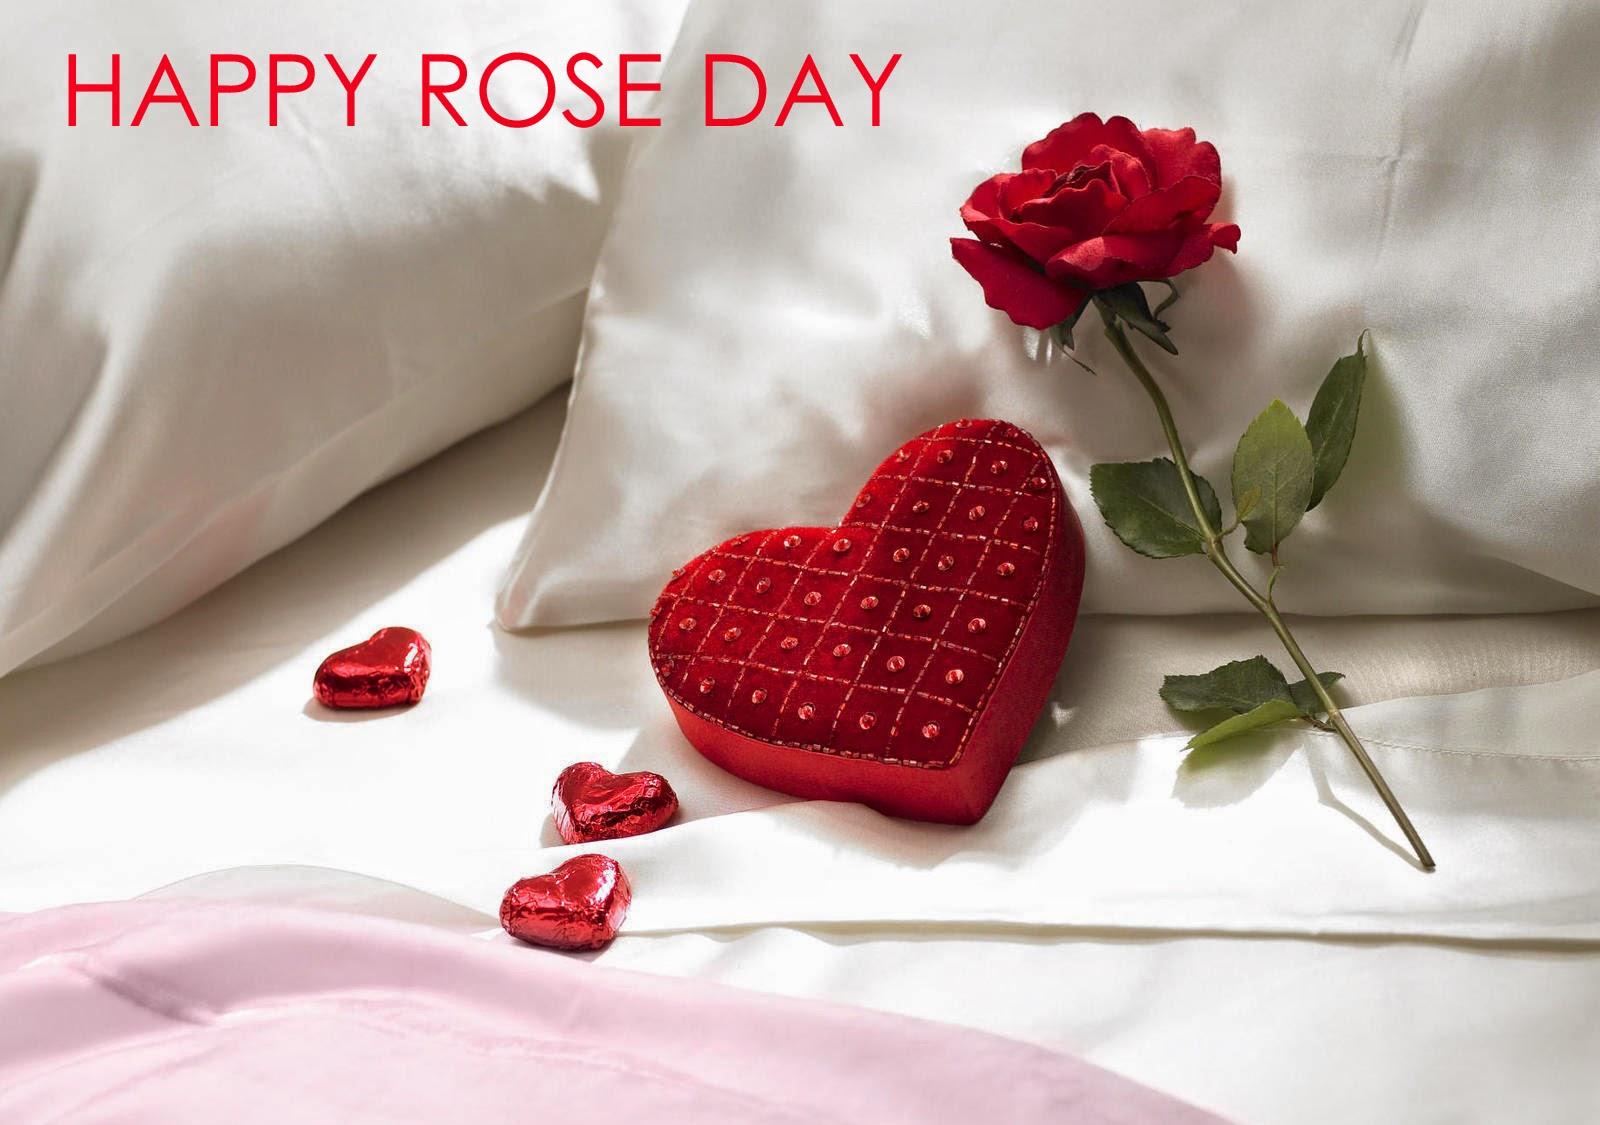 Happy Rose Day Pic Quotes Sms Image Wallpaper 2019